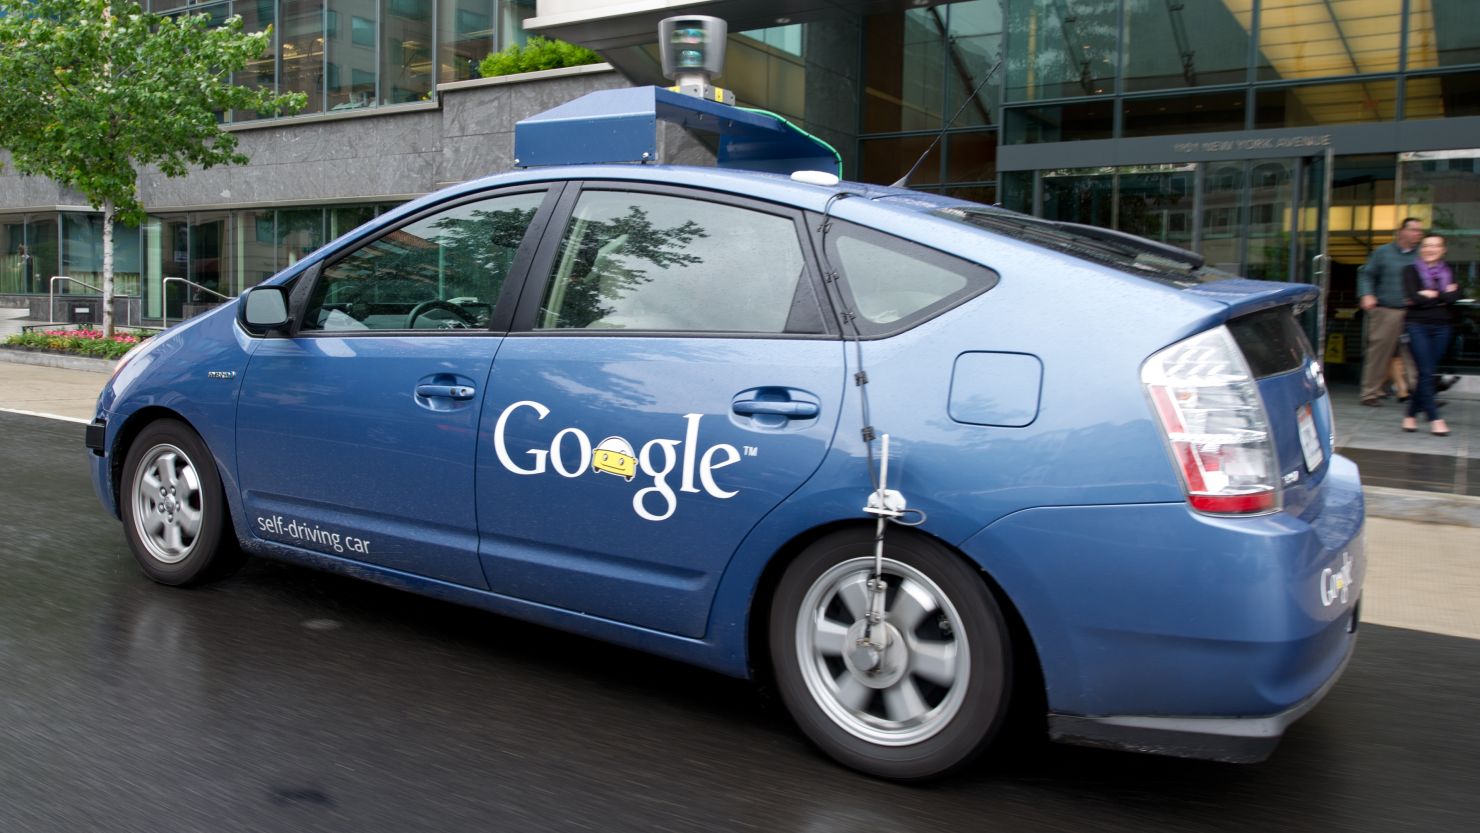 Google's self-driving car includes laser technology that creates a 3-D map of its surroundings.